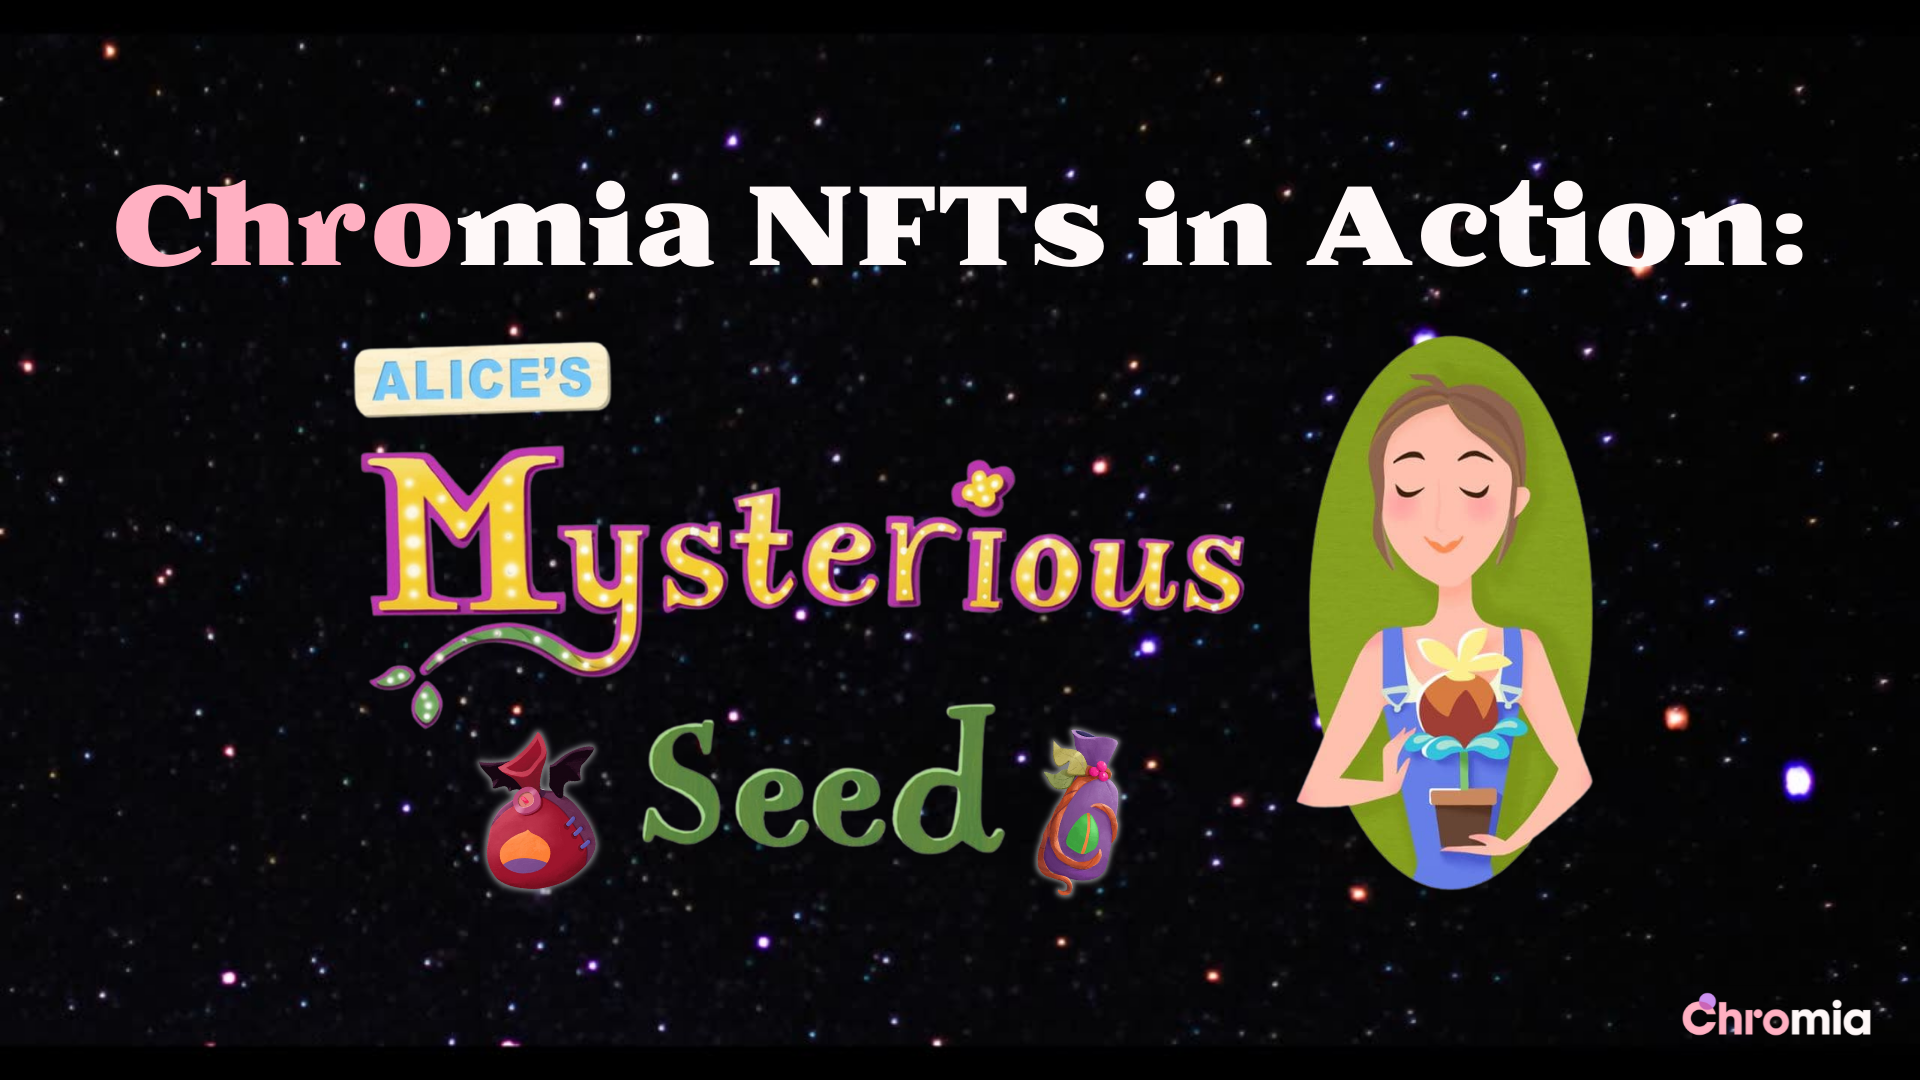 Chromia NFTs in Action: Alice’s Mysterious Seed